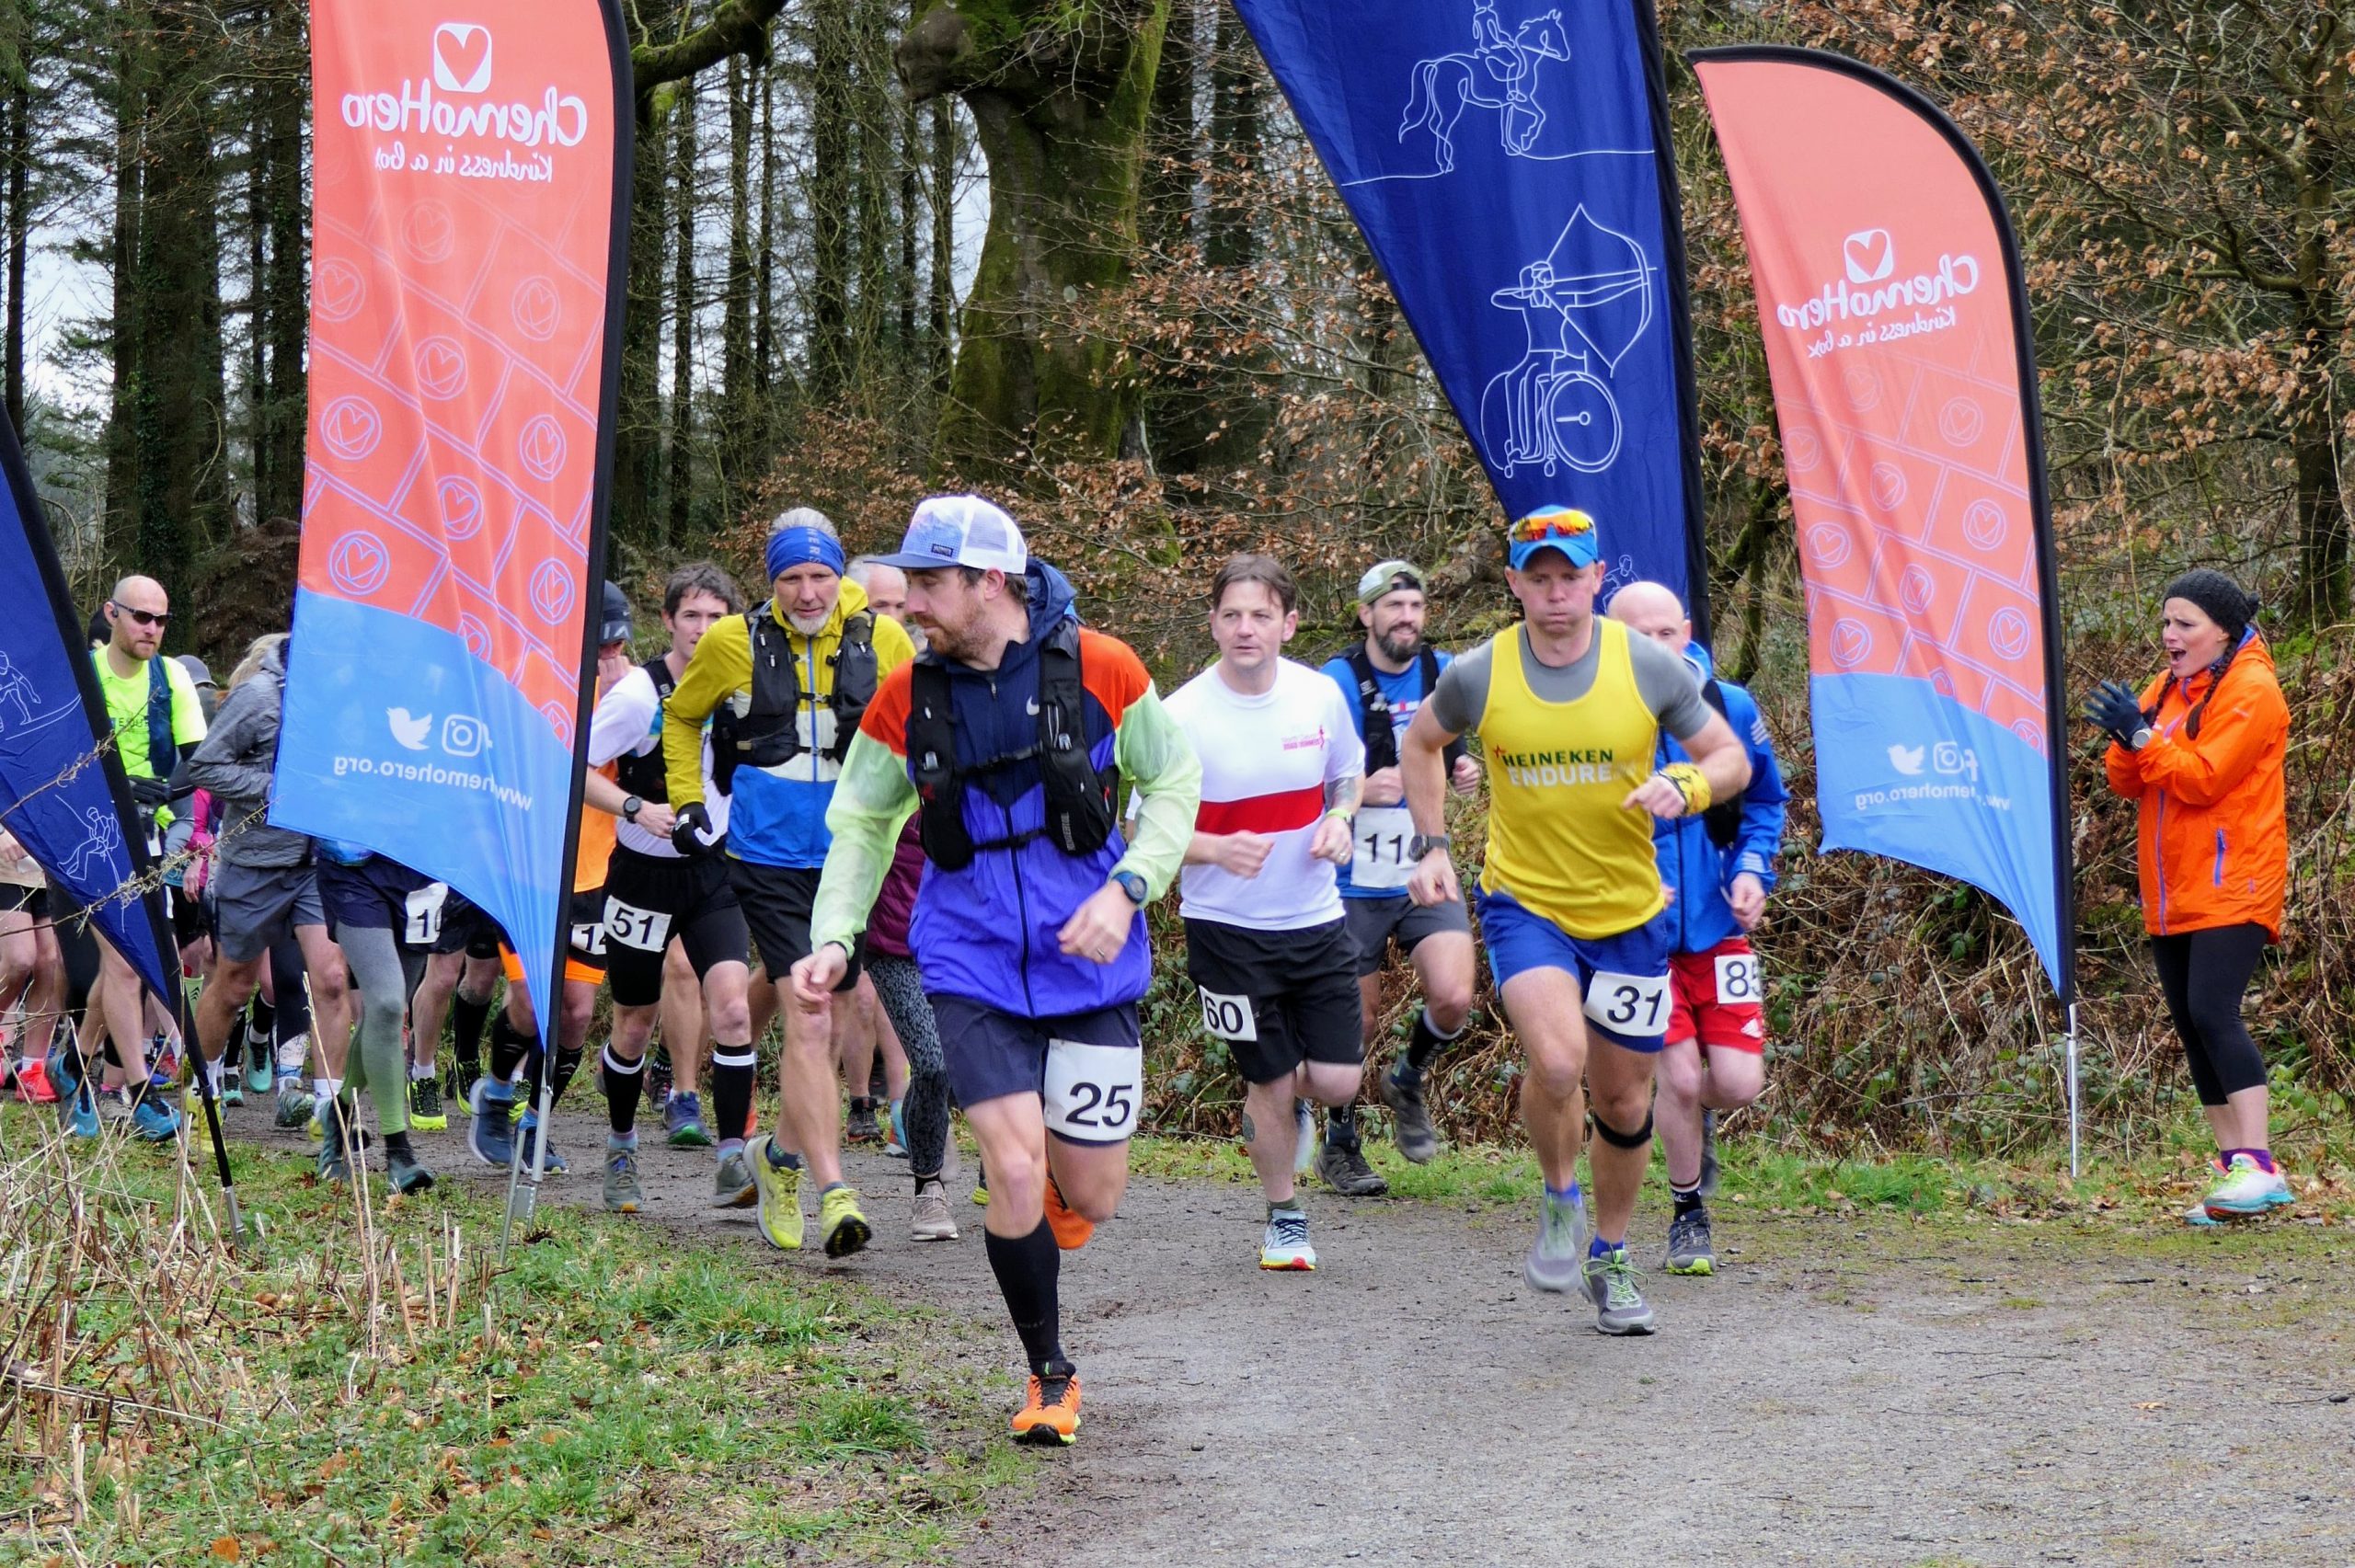 A group of runners running towards the camera on a dirt track in the forrest with Chemohero and Calvert Exmoor flags on the side